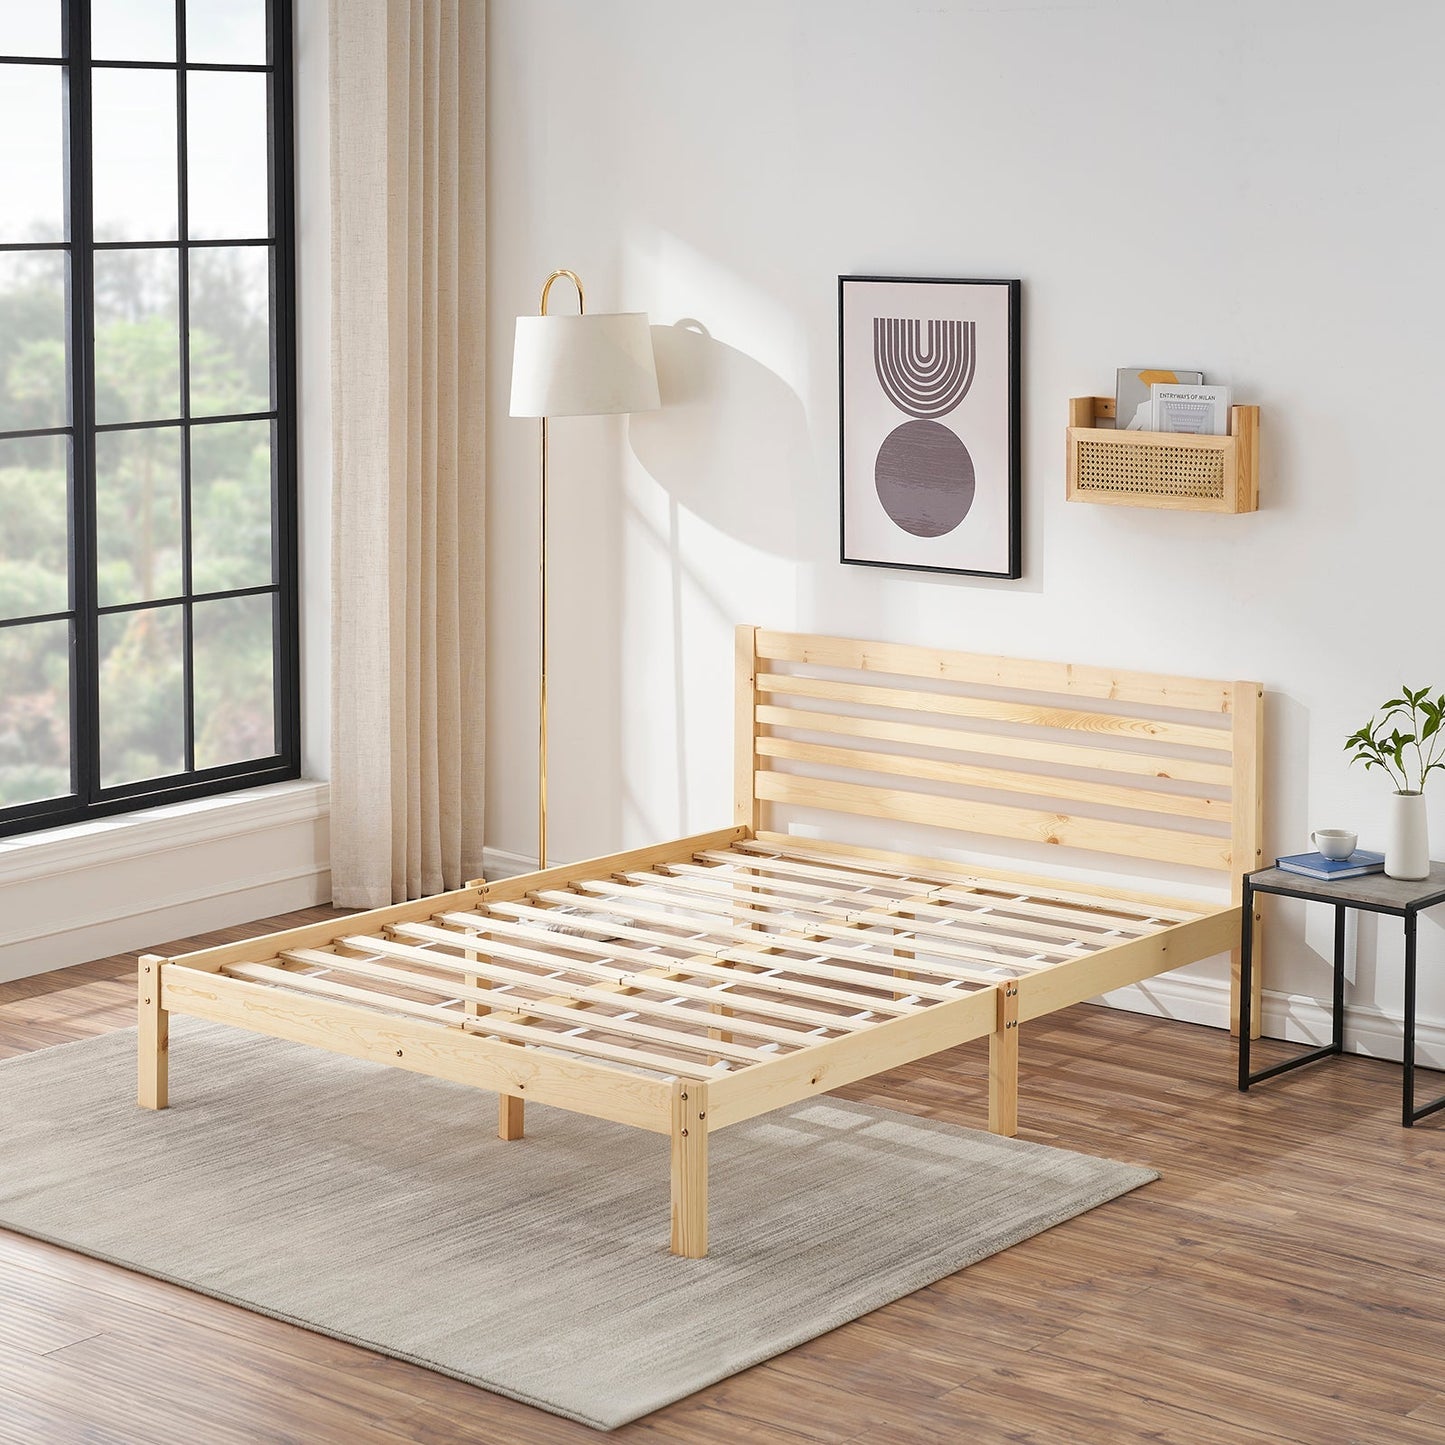 BEAN Wooden Single/Double Bed Frame 98*196cm/148*196cm - Natural Wood